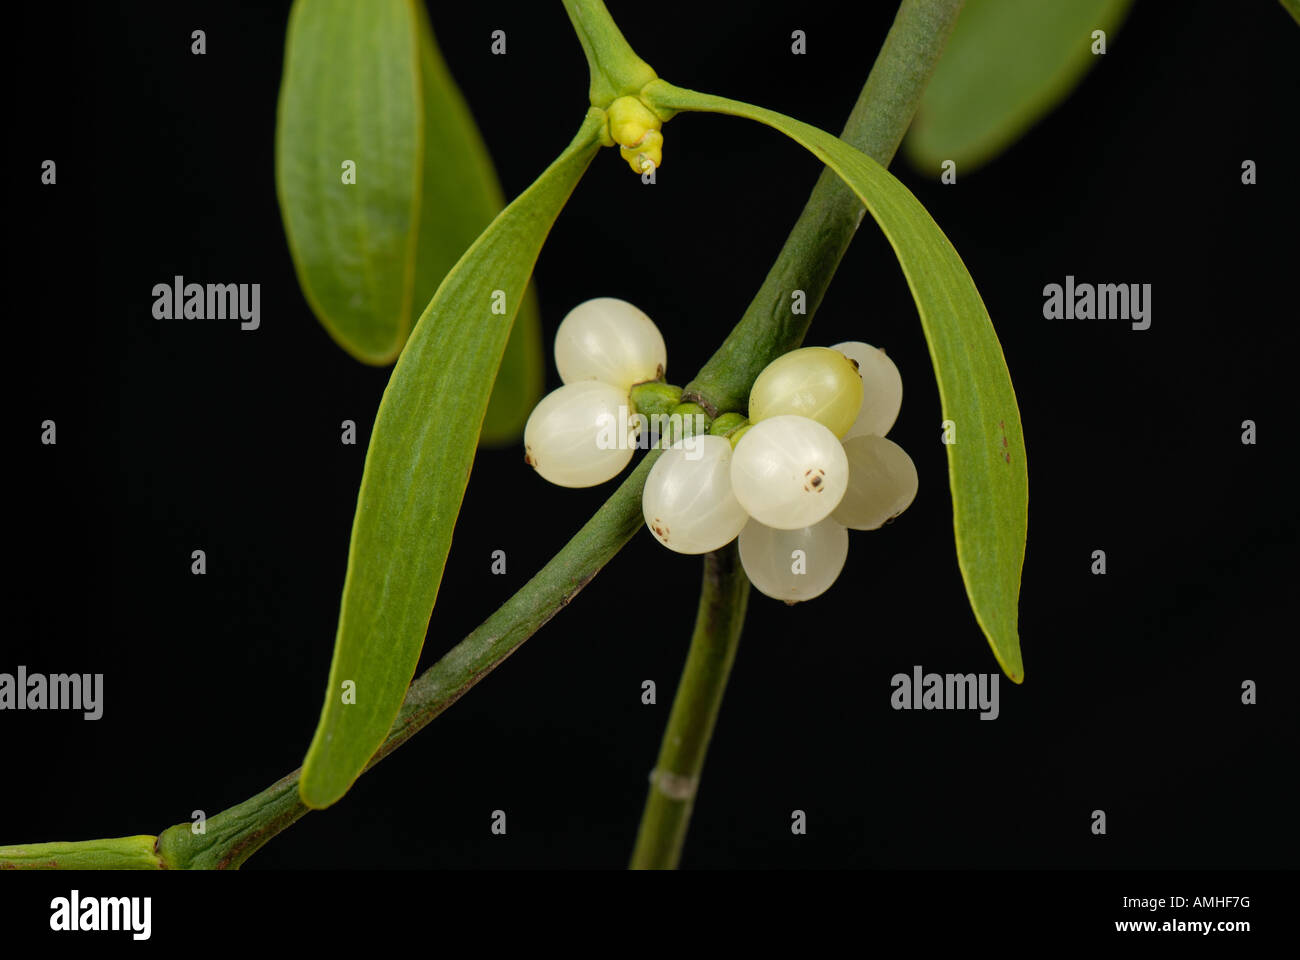 Mistetoe Viscum album leaves and white berries of traditional Christmas sprig Stock Photo